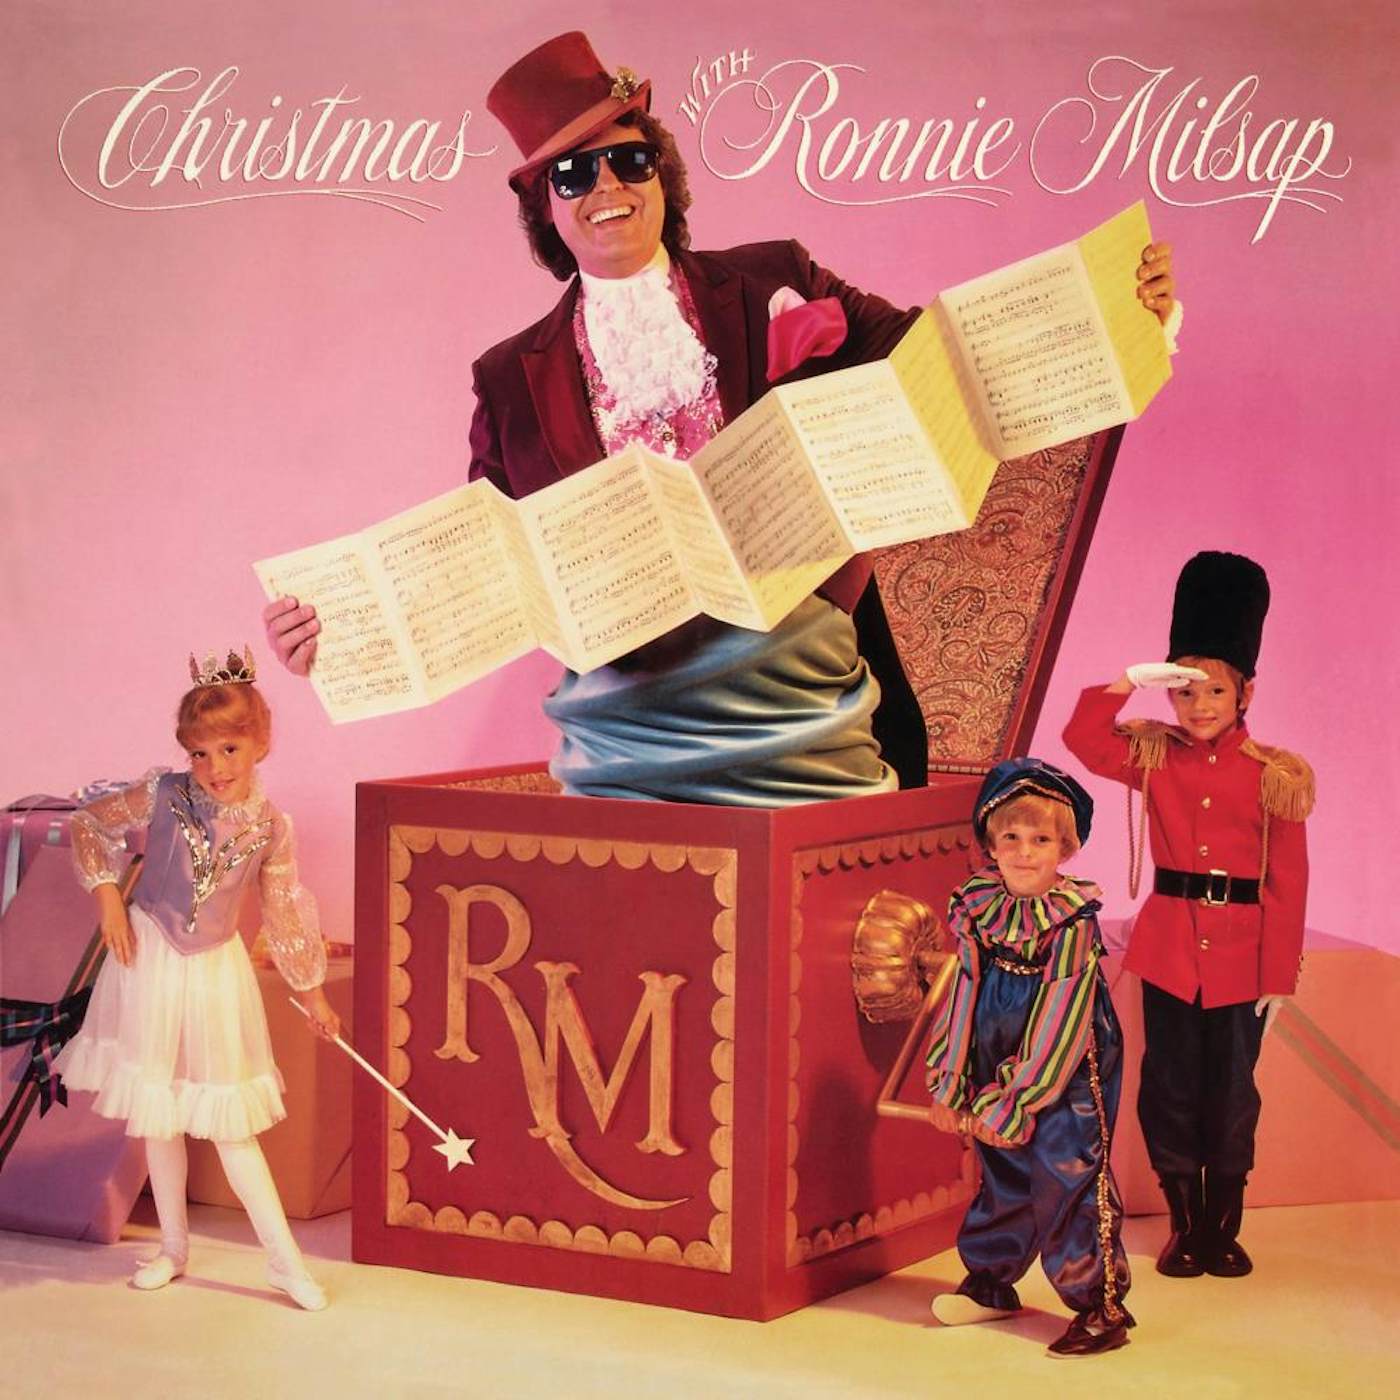 CHRISTMAS WITH RONNIE MILSAP CD